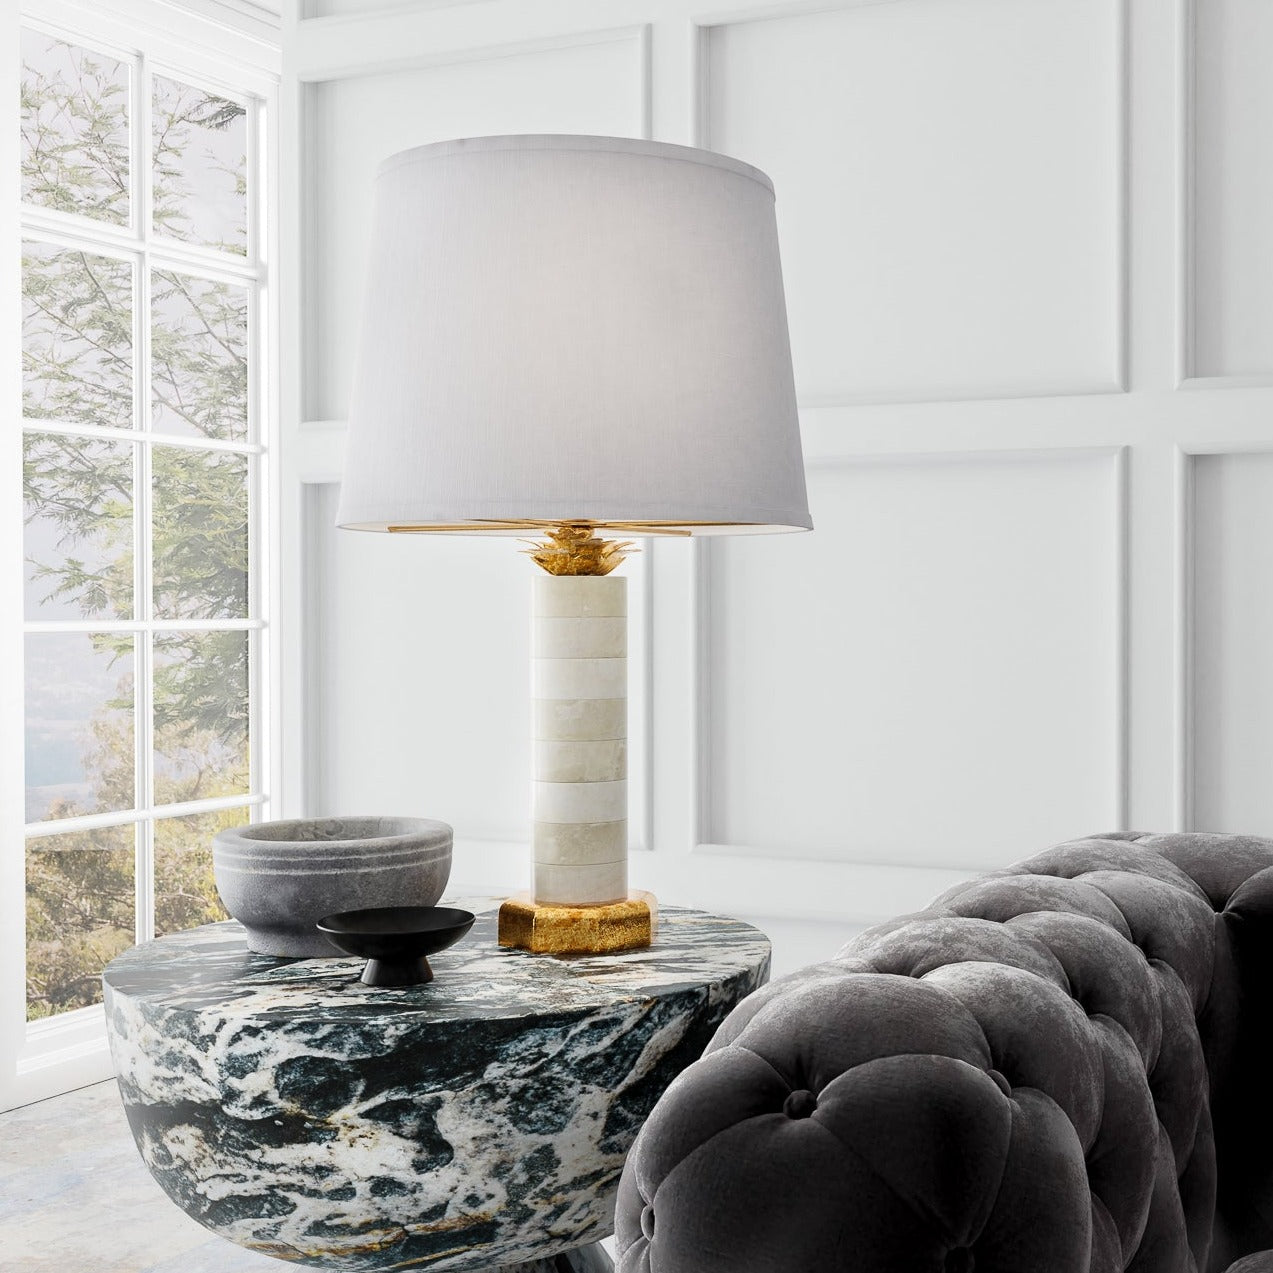 Alexis Table Lamp